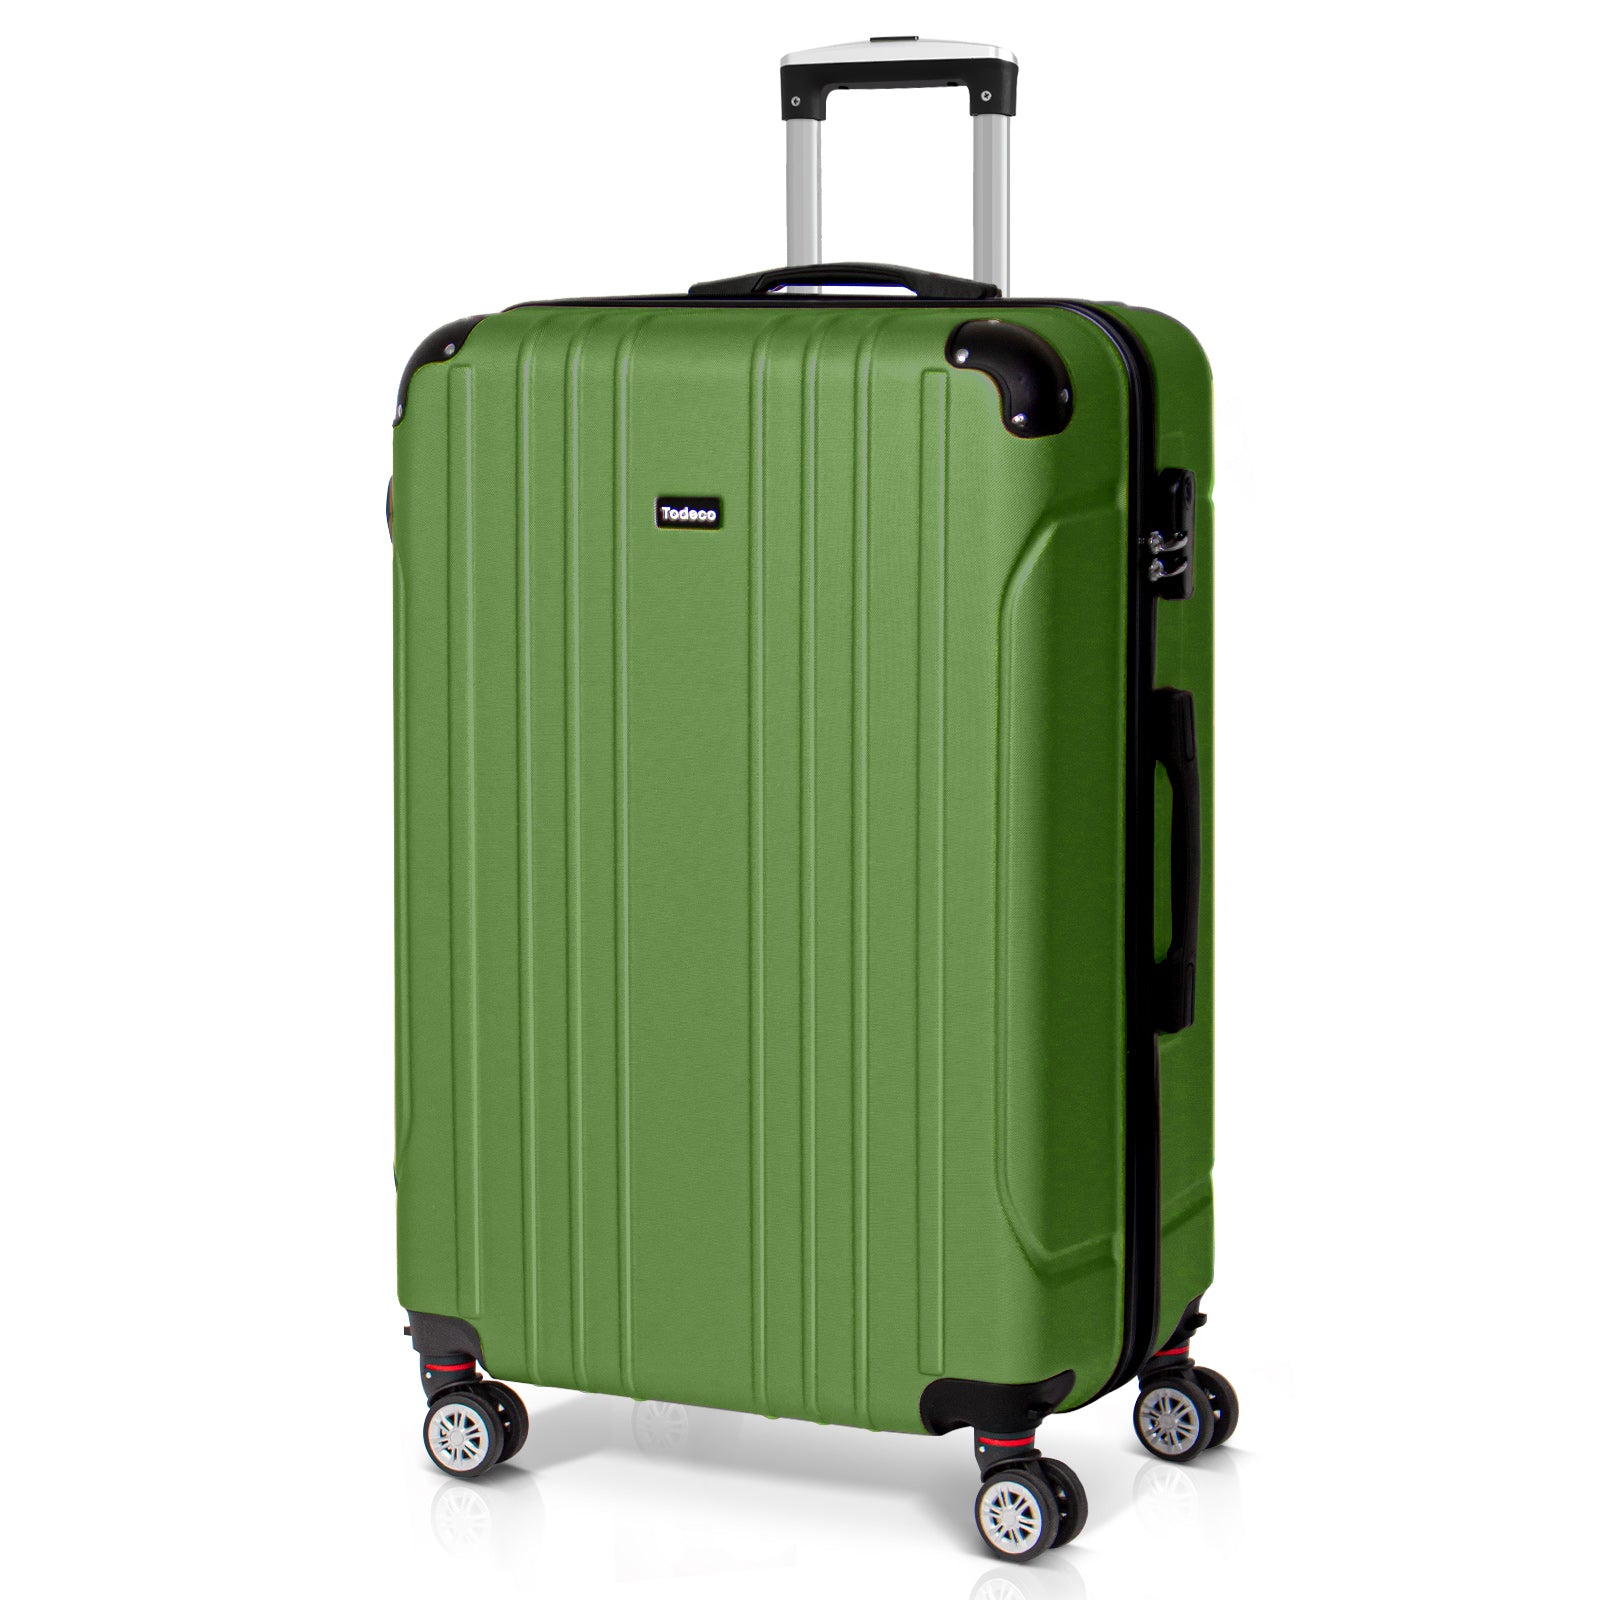 Todeco-Large-Size-Suitcase-78cm-Travel-Suitcase-Rigid-and-Lightweight-ABS-Travel-Suitcase-with-Wheels-Suitcases-4-Double-Wheels-78x51x28cm-Olive-Green-Large-Size-Suitcase-78cm-Olive-Green